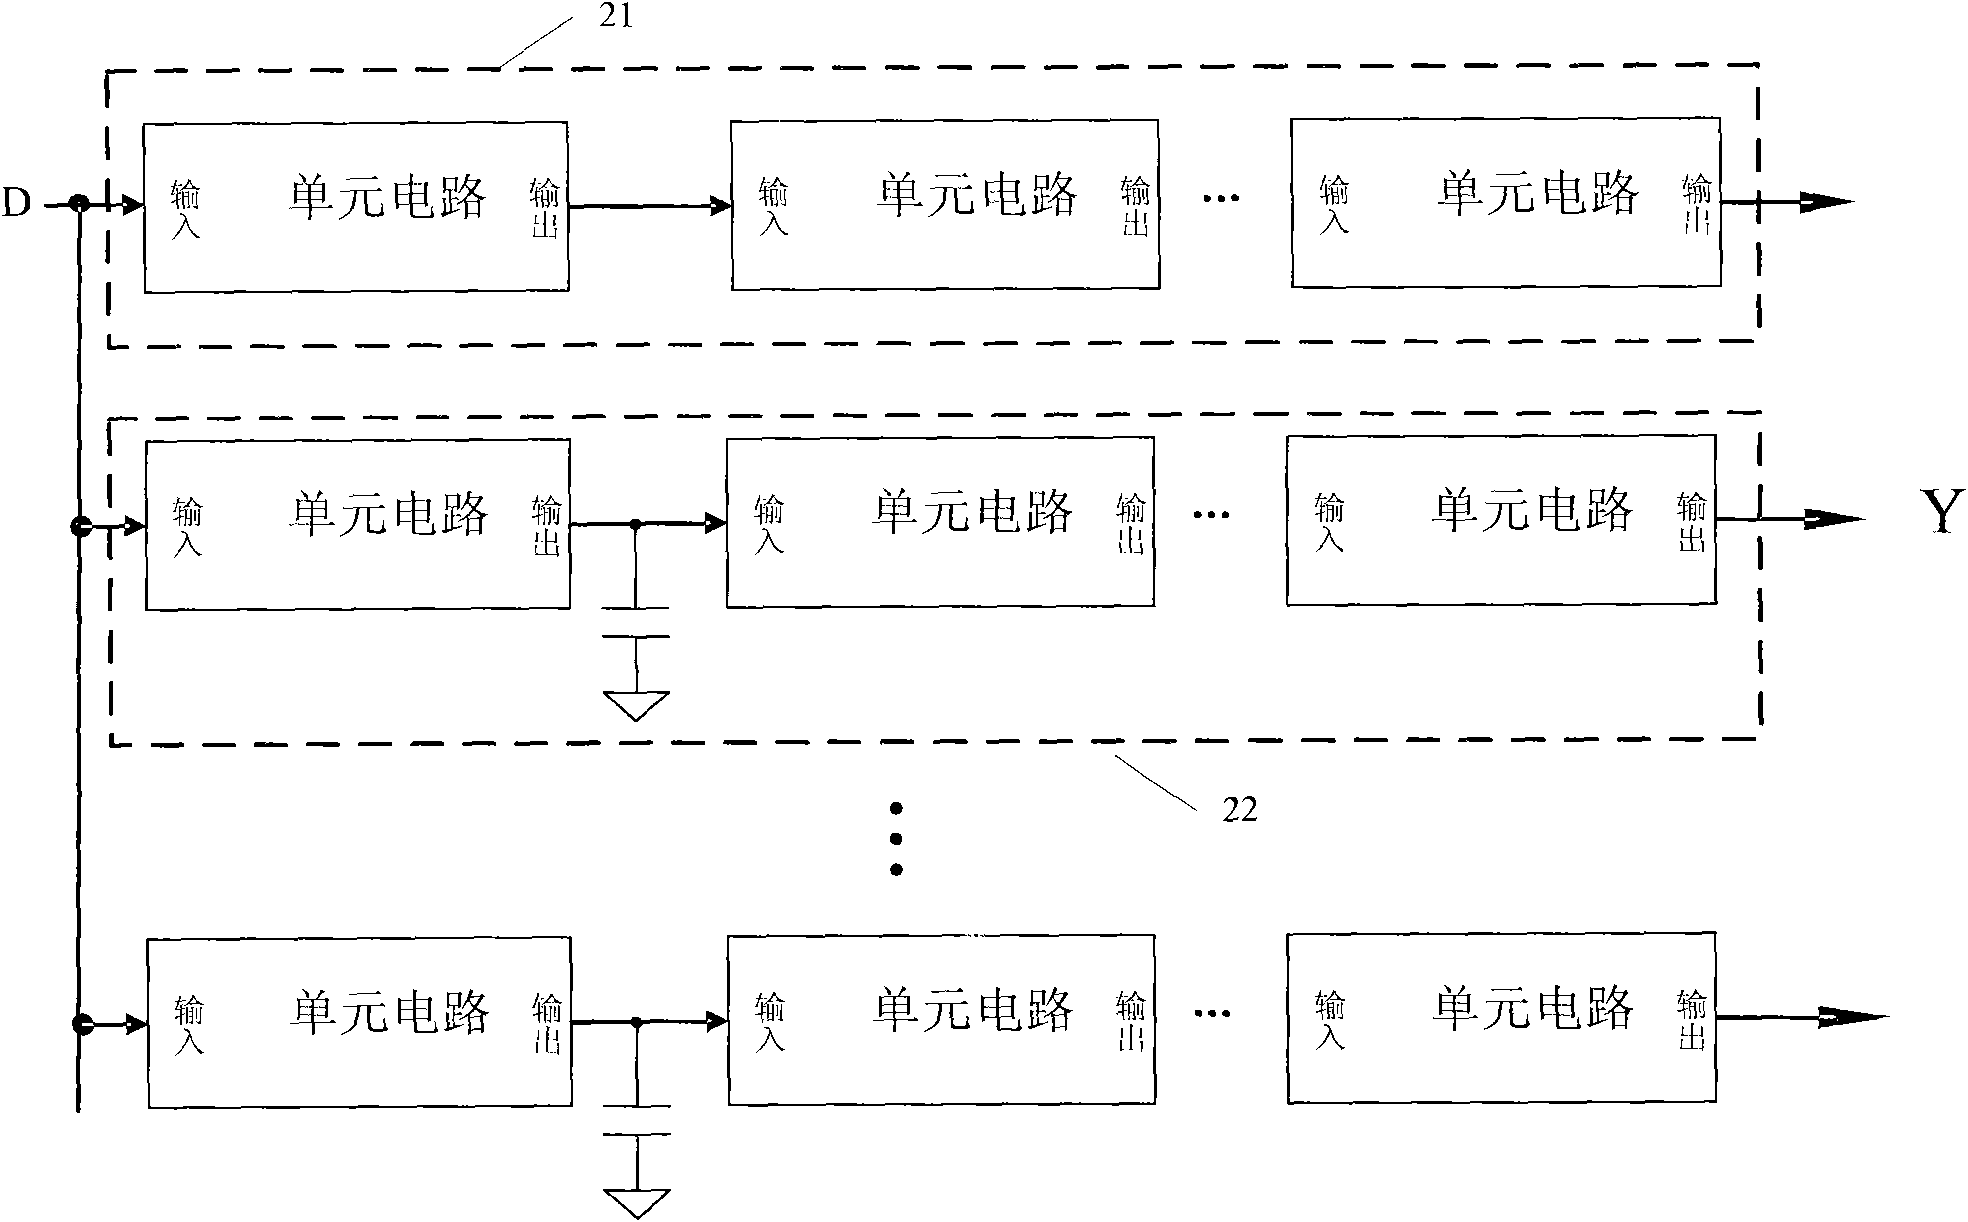 A structure of SET collecting and detecting circuit